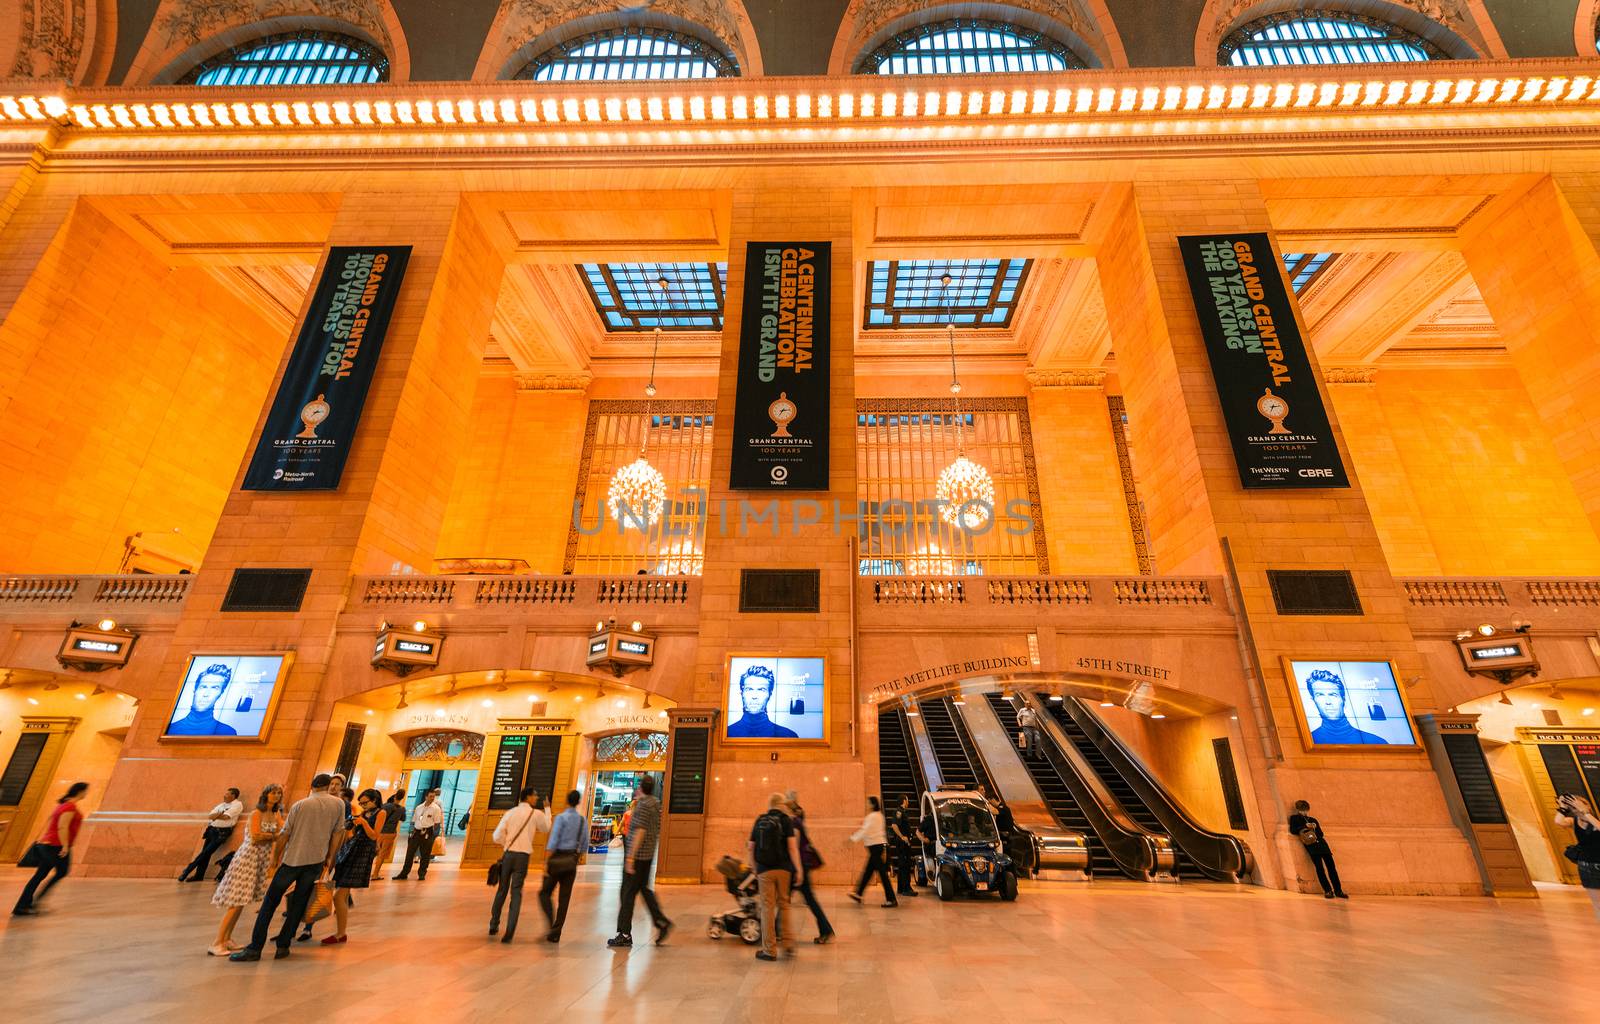 NEW YORK, MAY 14: Commuters and tourists in the grand central station in May 14, 2013 in New York. It is the largest train station in the world by number of platforms: 44, with 67 tracks.